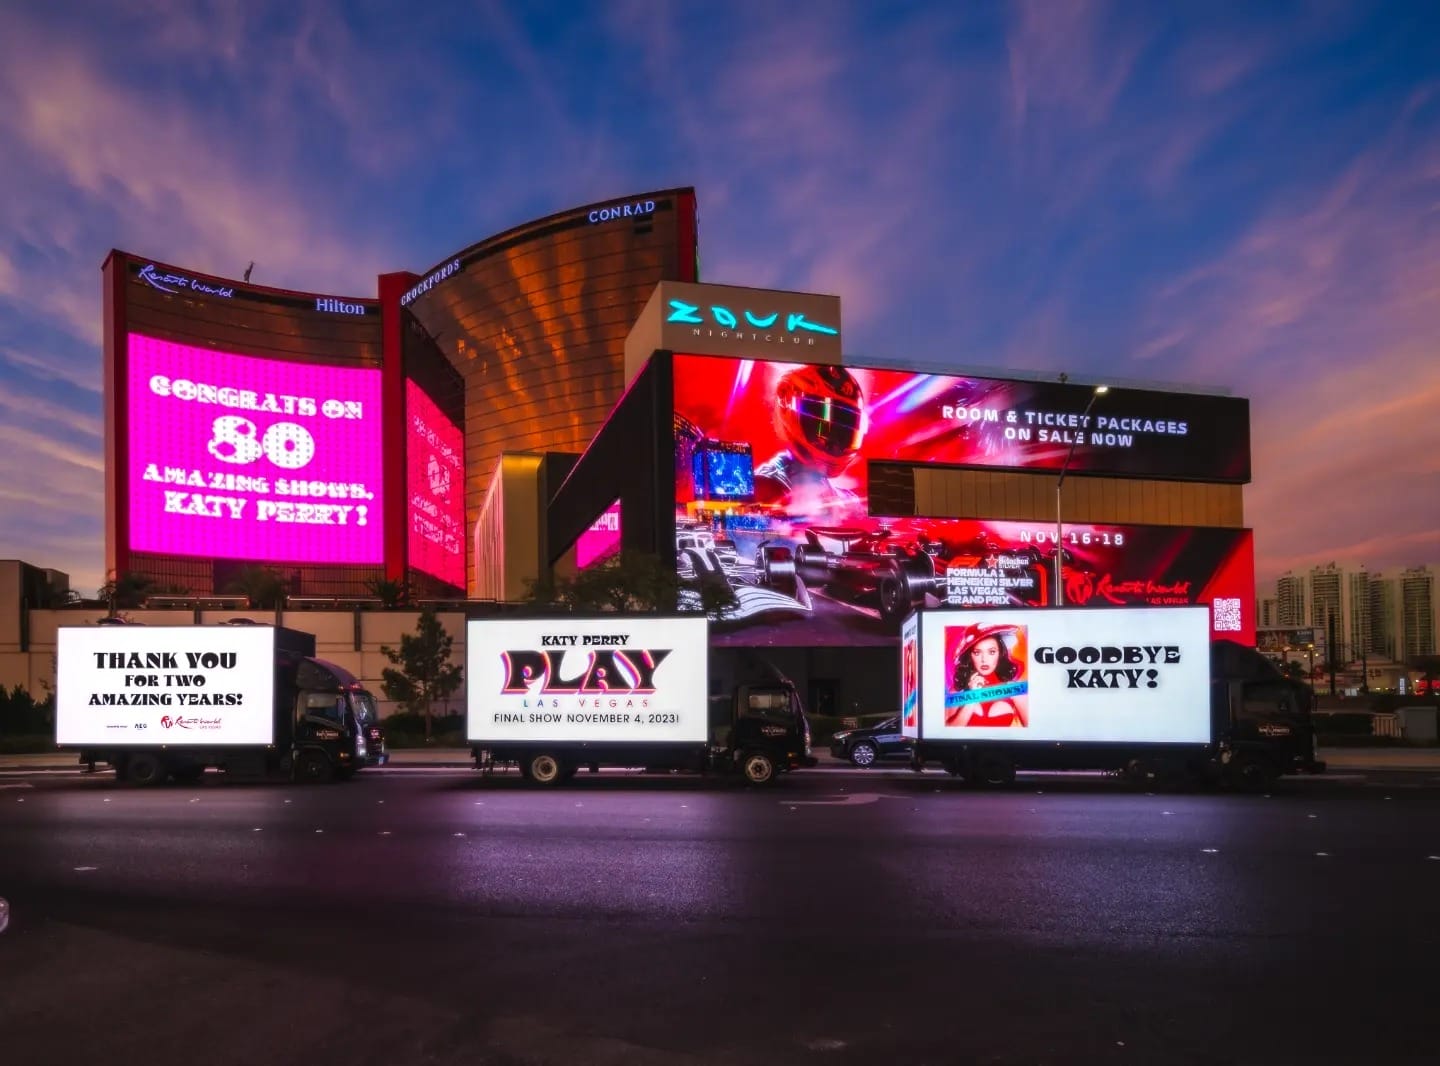 Las Vegas billboards and truck with advertisements at dusk.